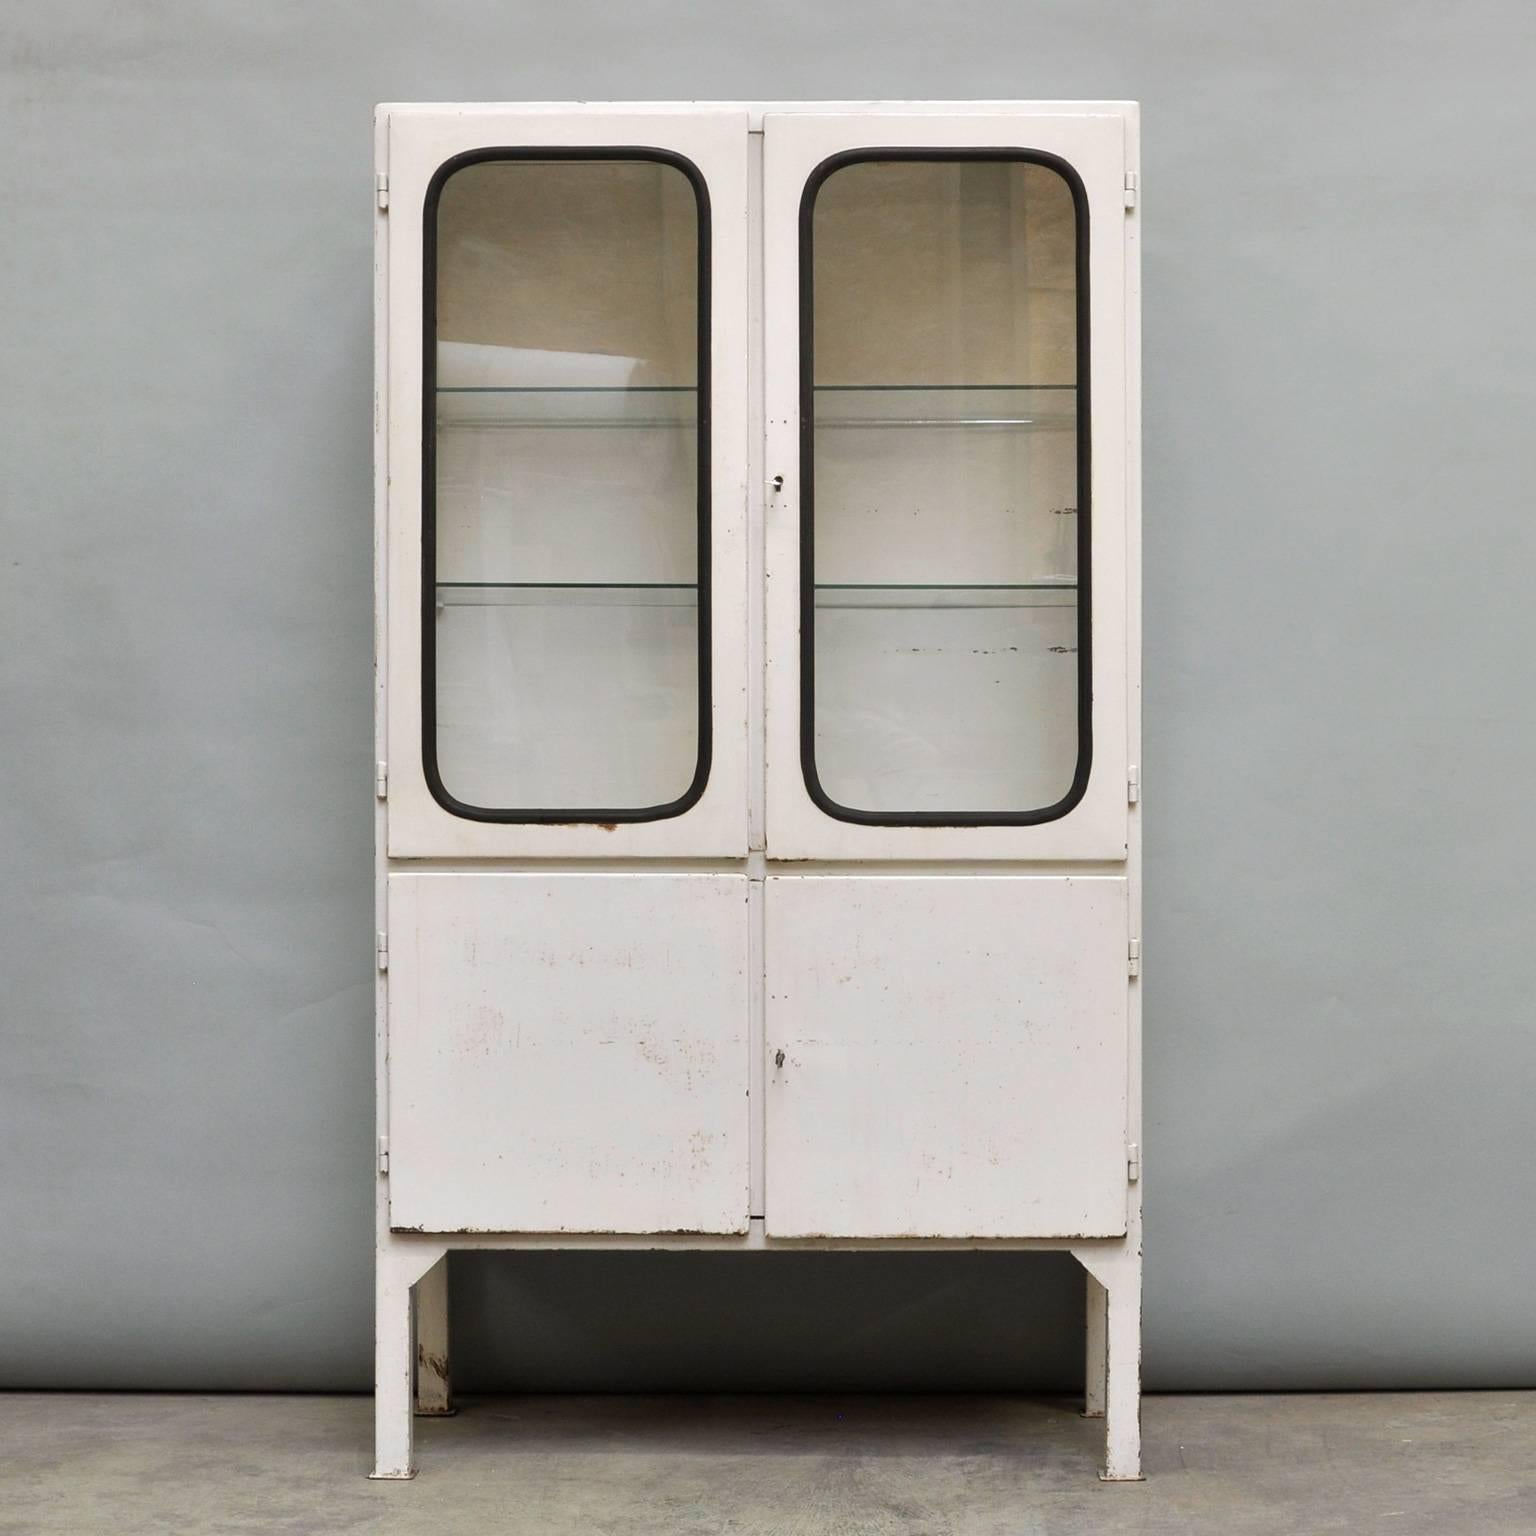 This medicine cabinet was designed in the 1970s and was produced circa 1975 in Hungary. It is made from iron and glass, and the glass is held by a black rubber strip. The cabinet features two adjustable glass shelves and functioning locks. The